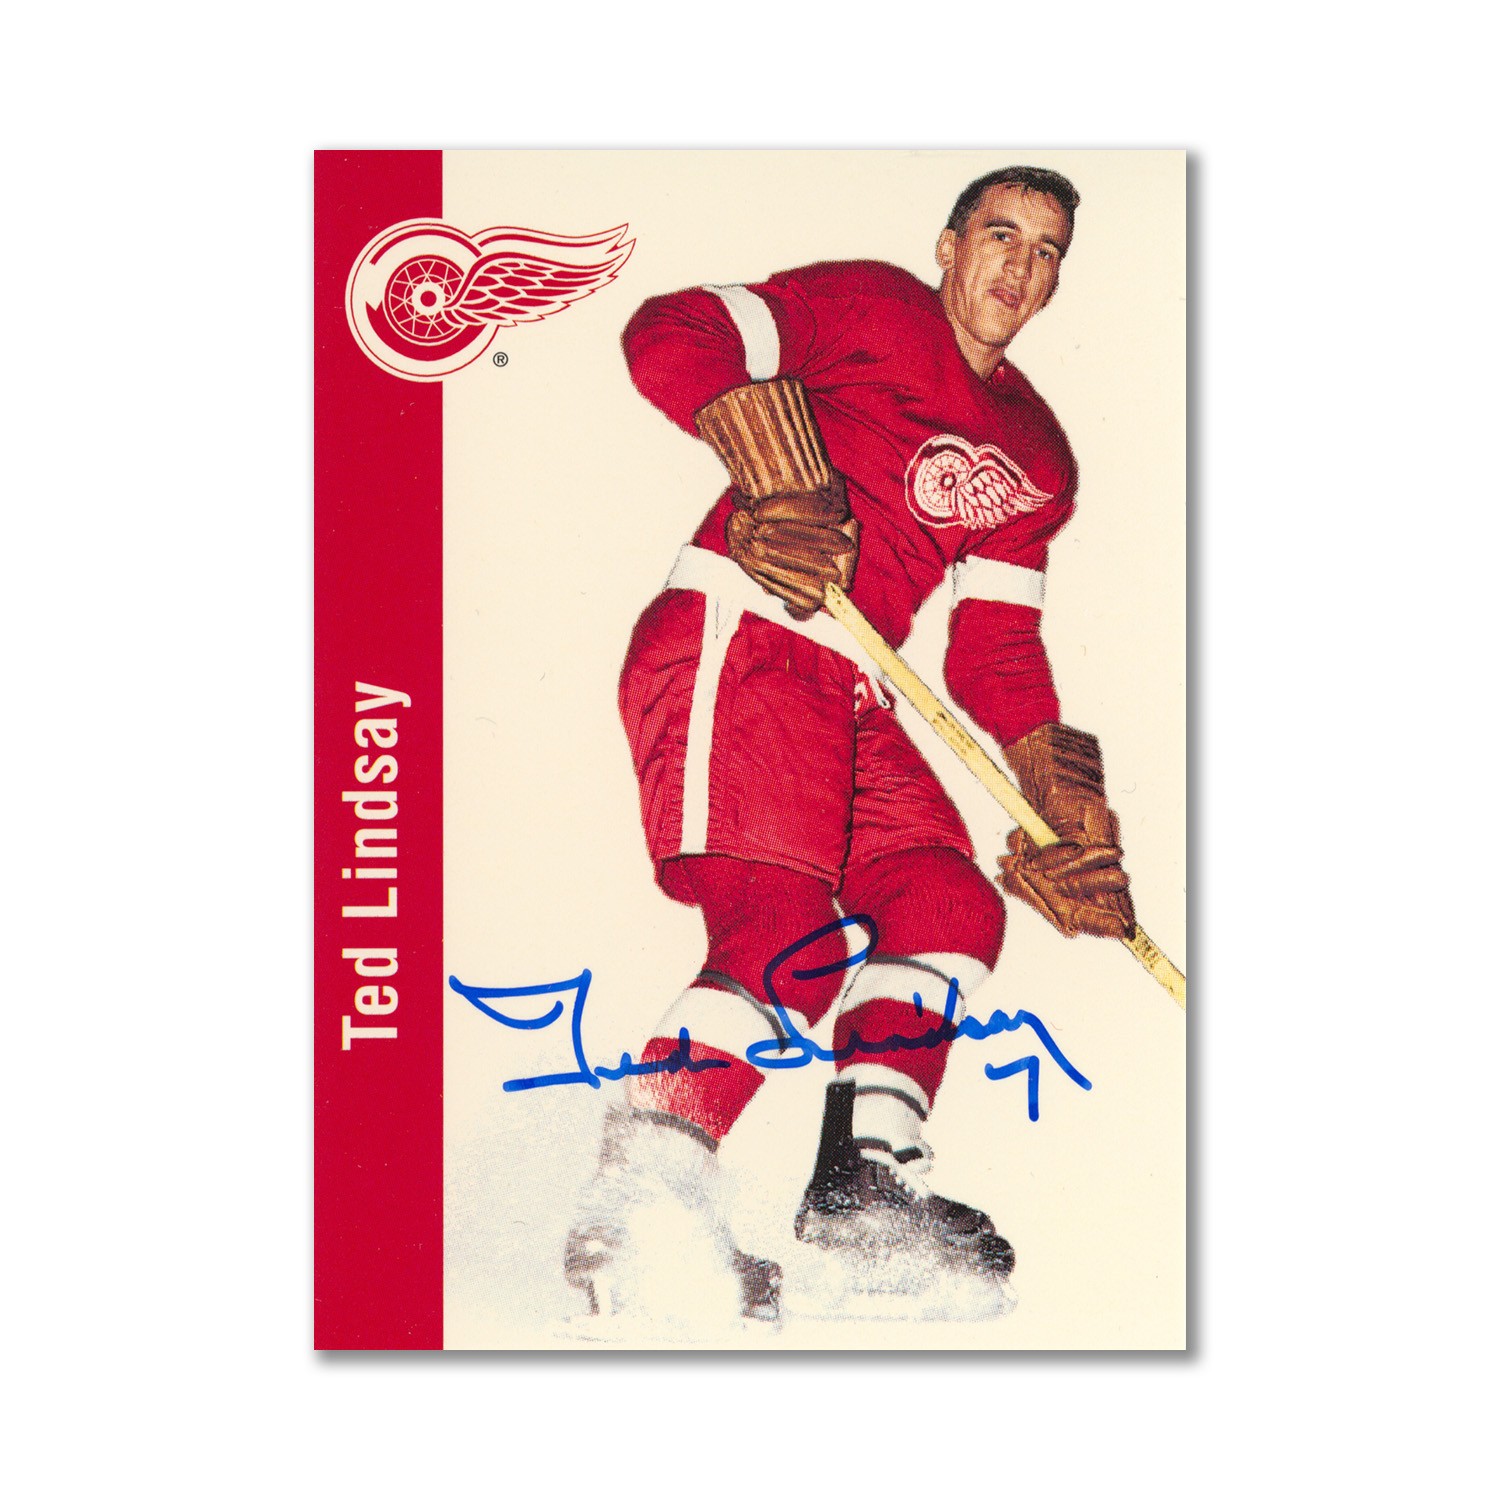 Ted Lindsay Autographed Memorabilia  Signed Photo, Jersey, Collectibles &  Merchandise